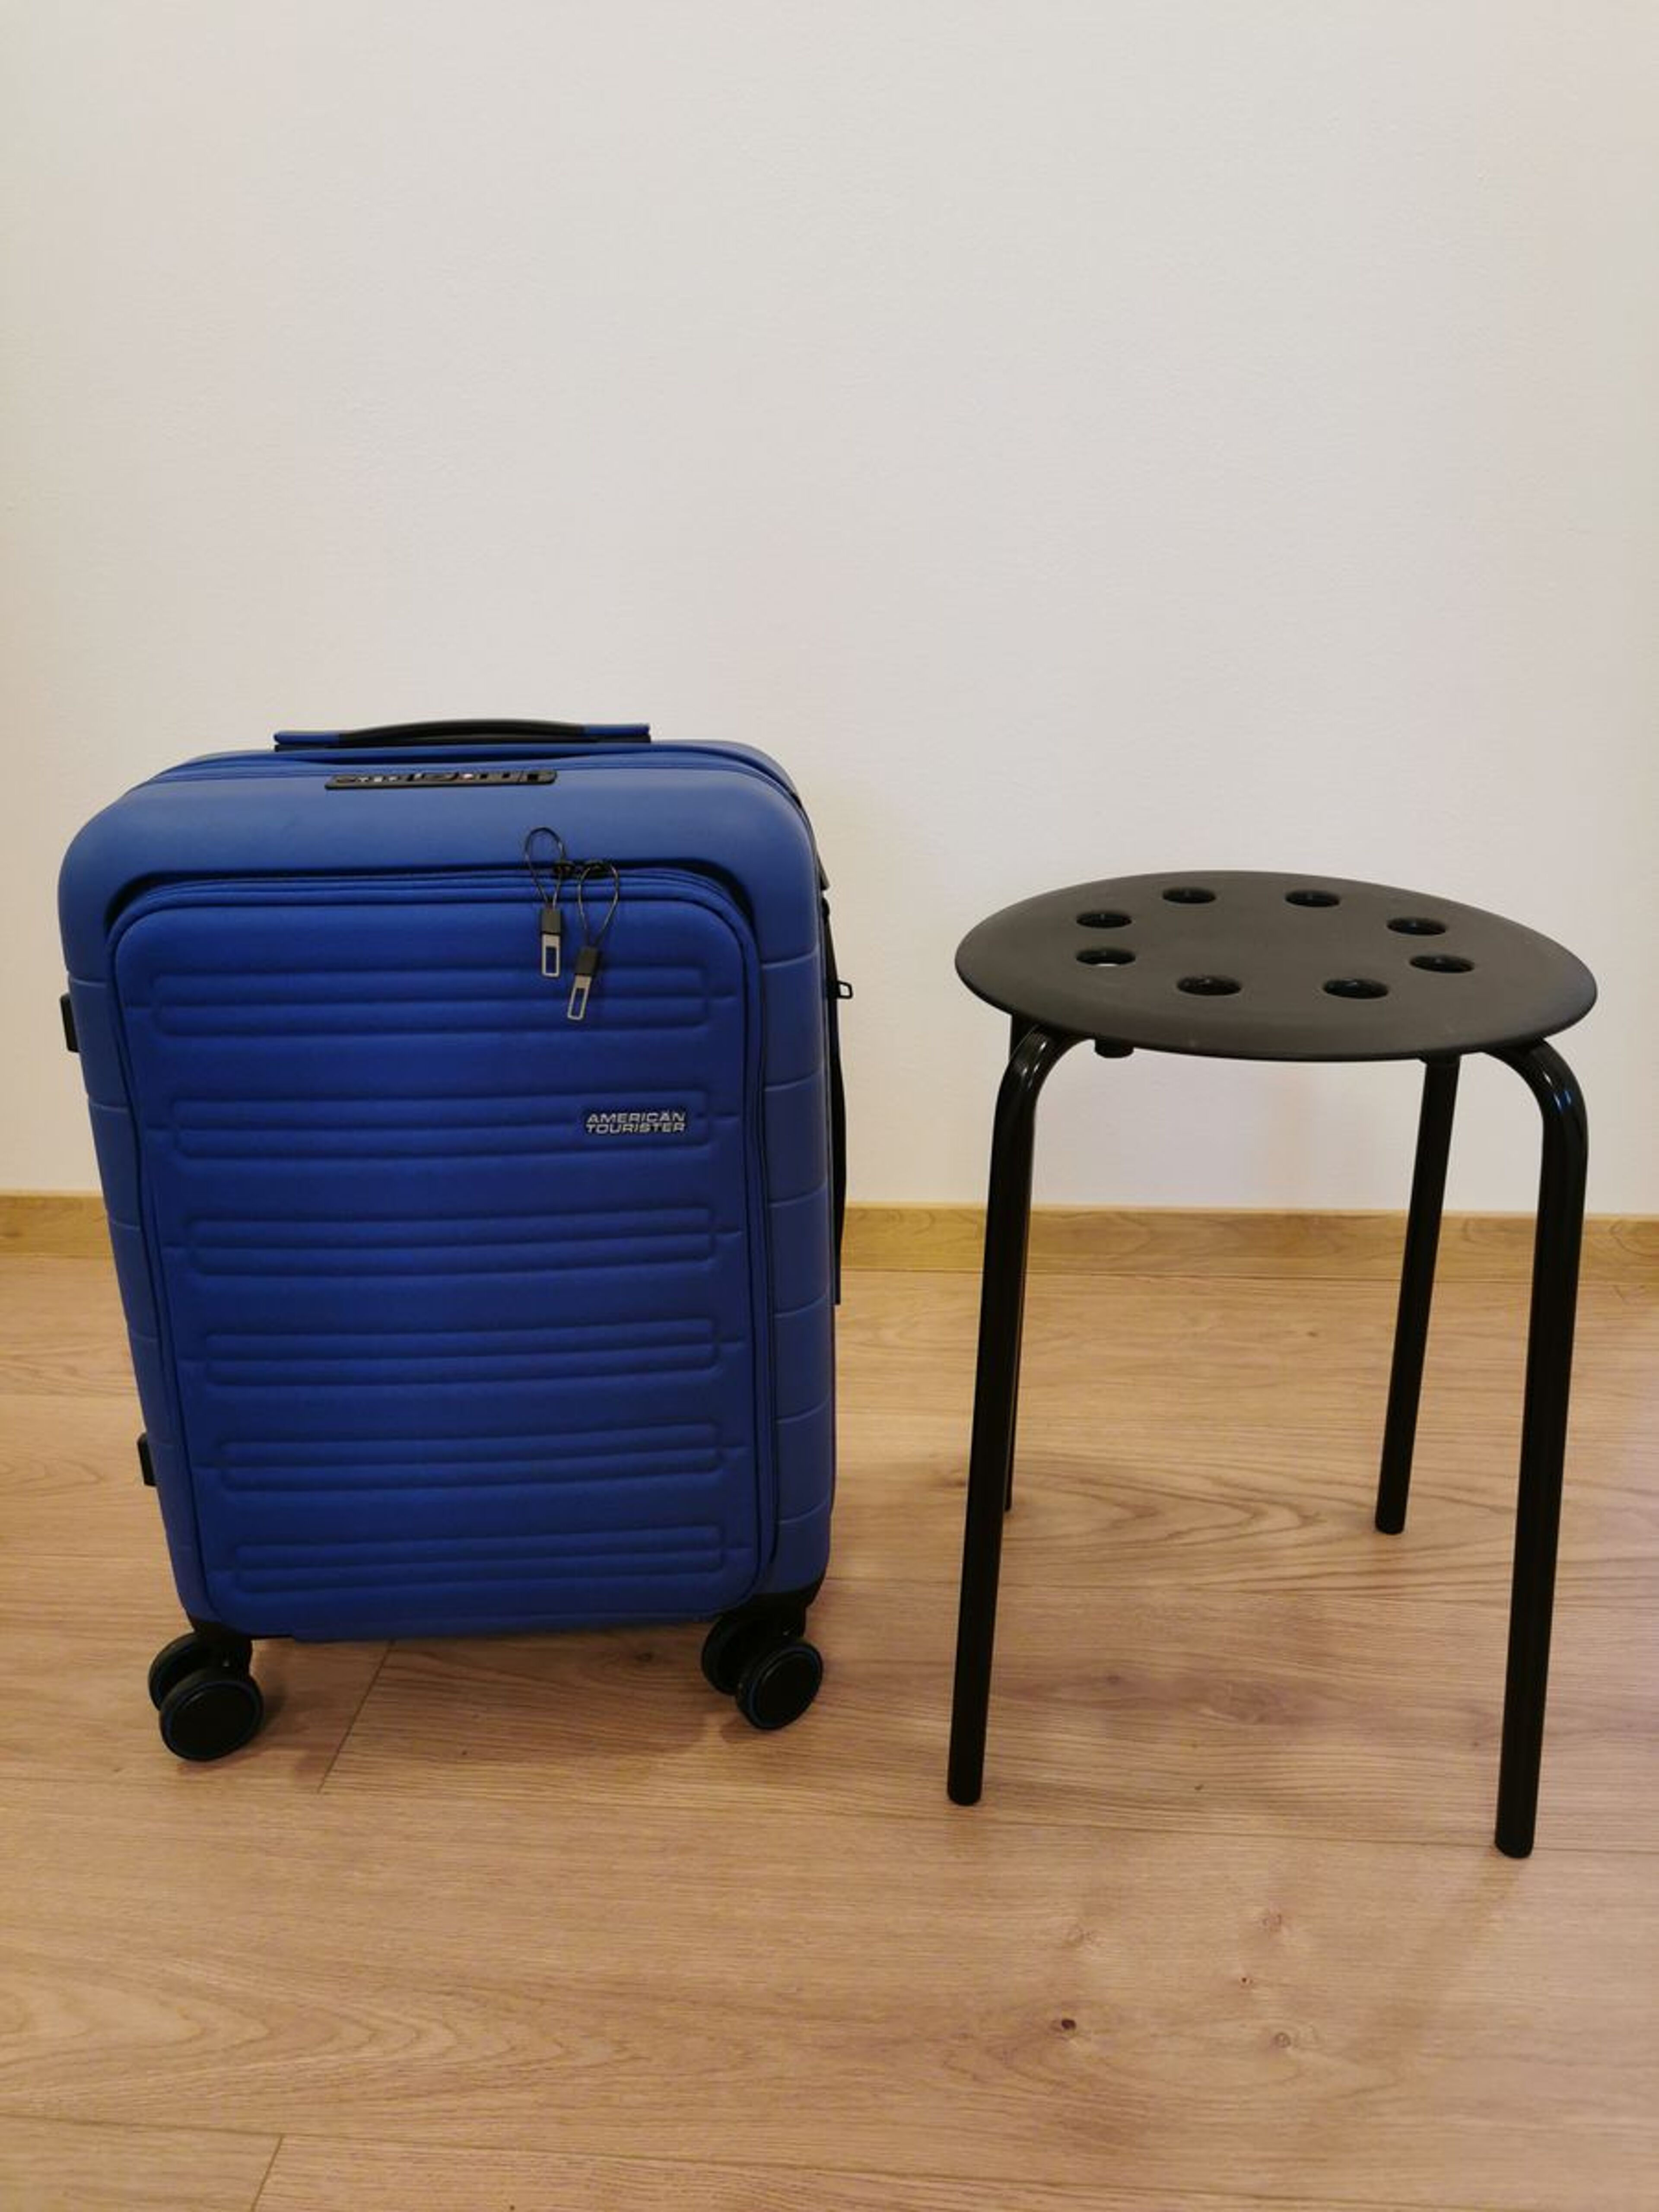 Review for American Tourister - Novastream - Spinner 55 EXP + Laptop Compartment Travel Suitcase - image from Tereza